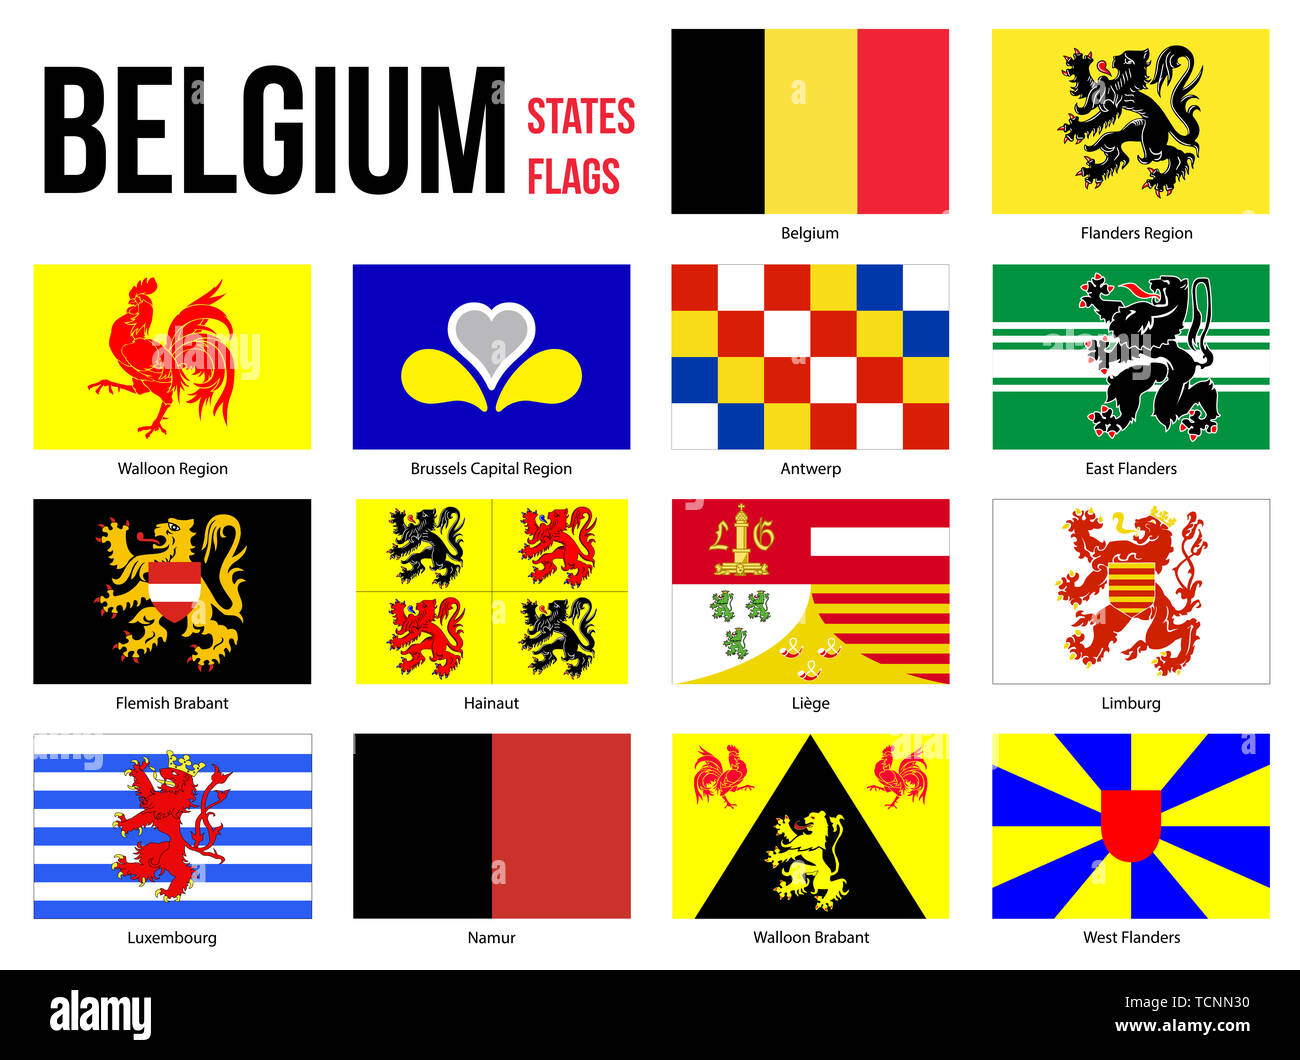 Belgium All Region & Provinces Flag Vector Illustration on White Background. Flags of Belgium. Correct Size, Proportion and Colors. Stock Photo